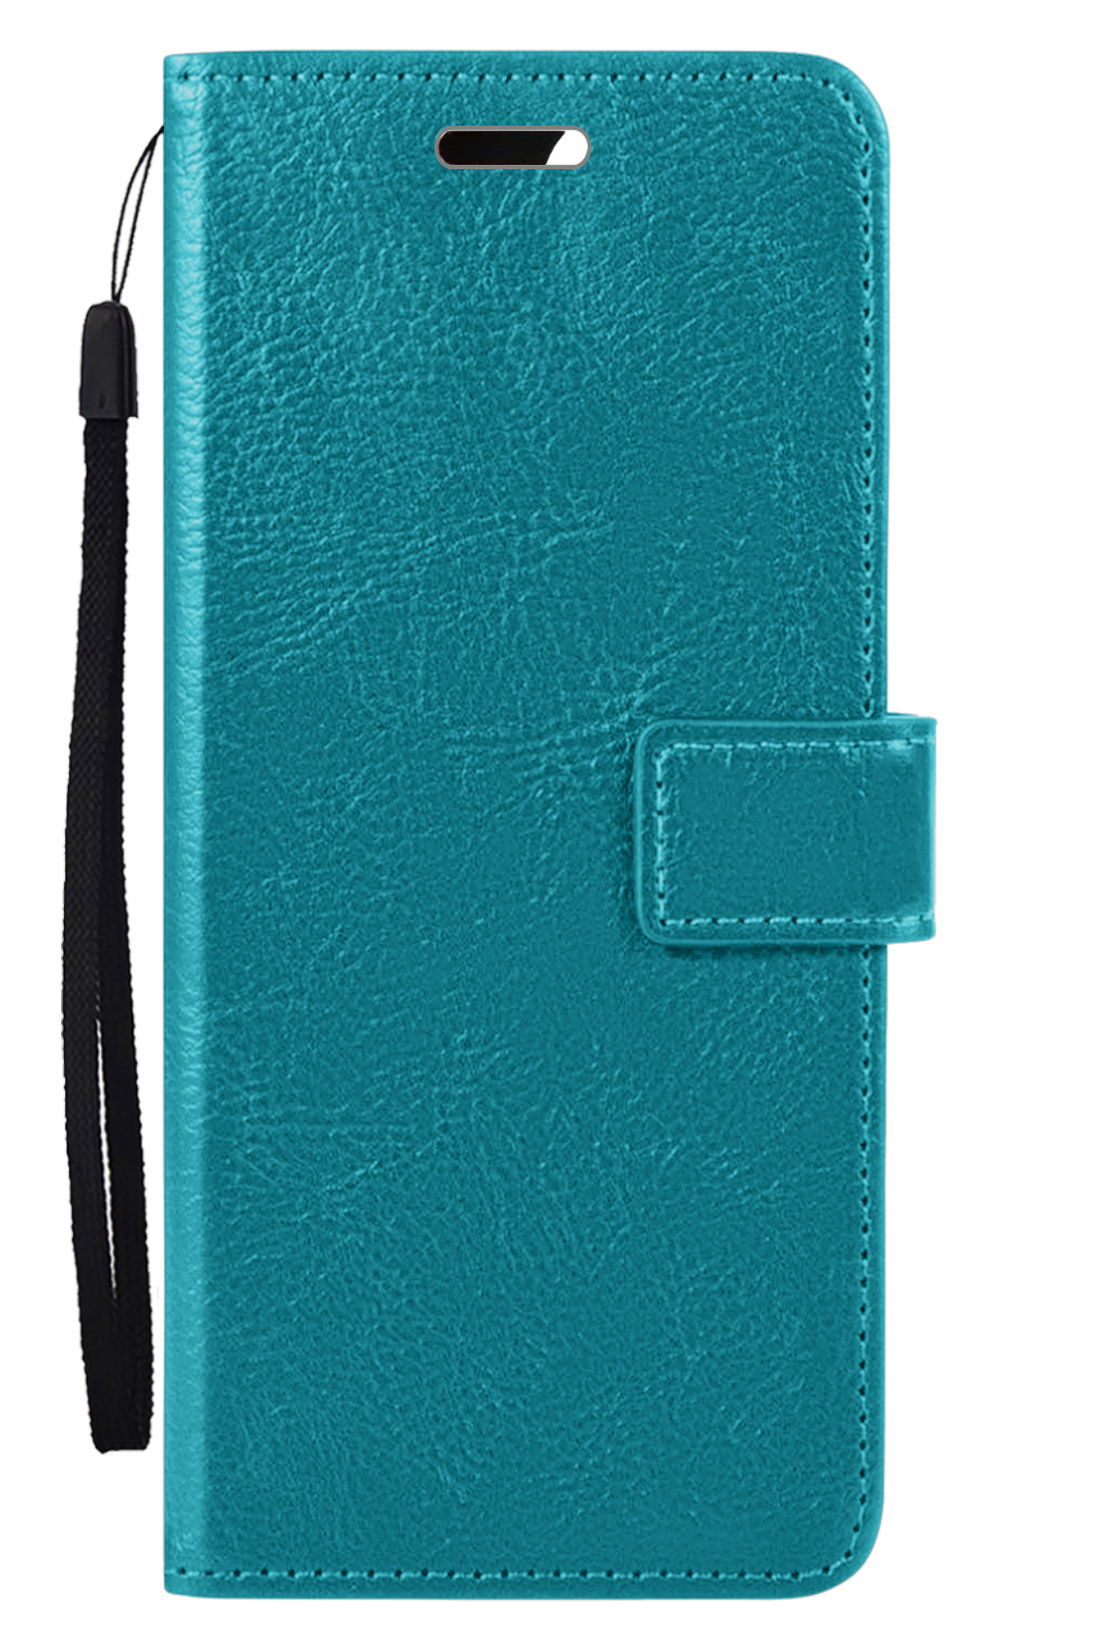 Nomfy Samsung Galaxy A53 Hoes Bookcase Turquoise - Flipcase Turquoise - Samsung Galaxy A53 Book Cover - Samsung Galaxy A53 Hoesje Turquoise